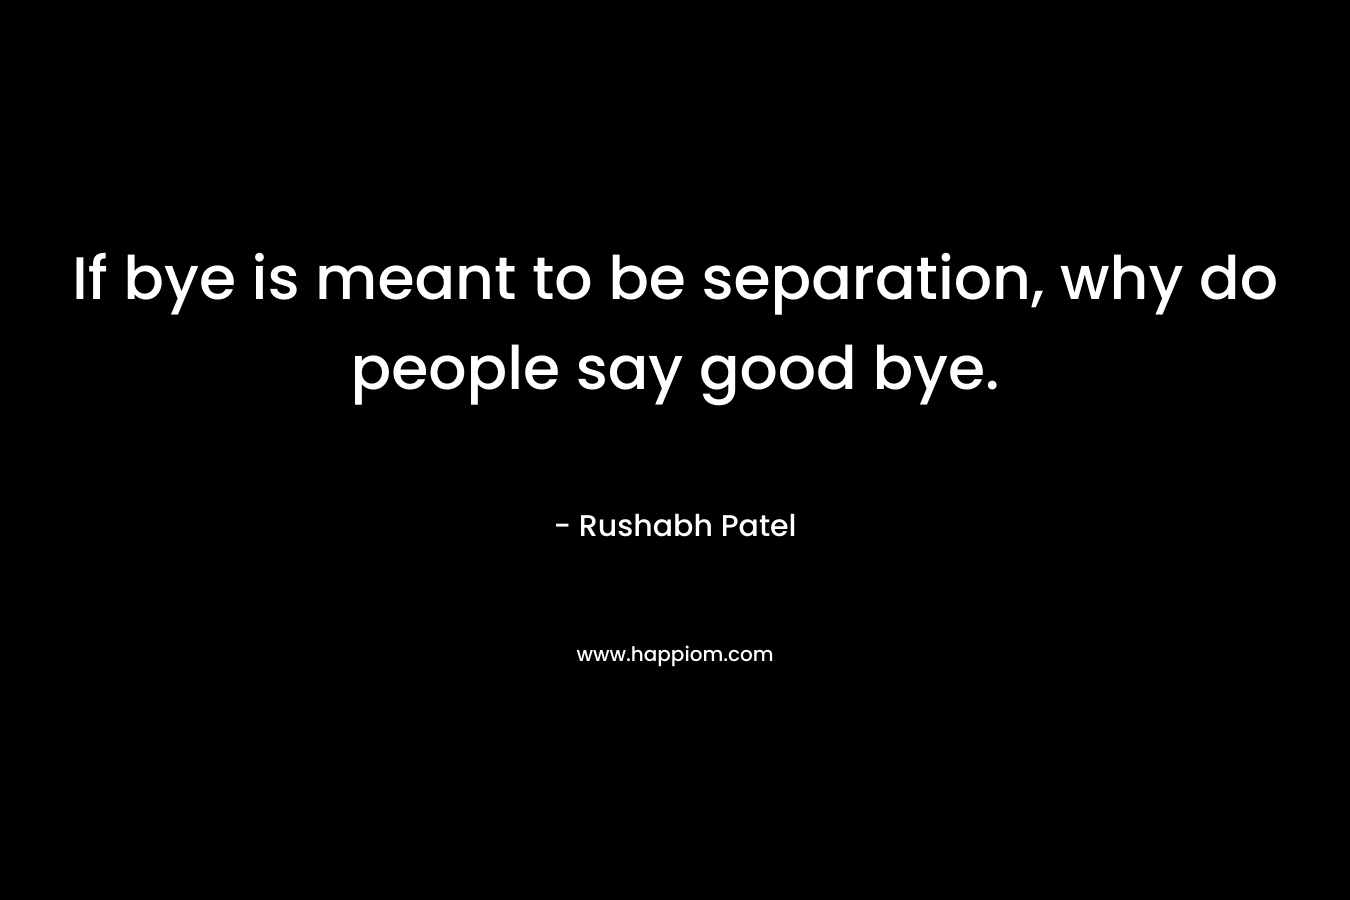 If bye is meant to be separation, why do people say good bye.